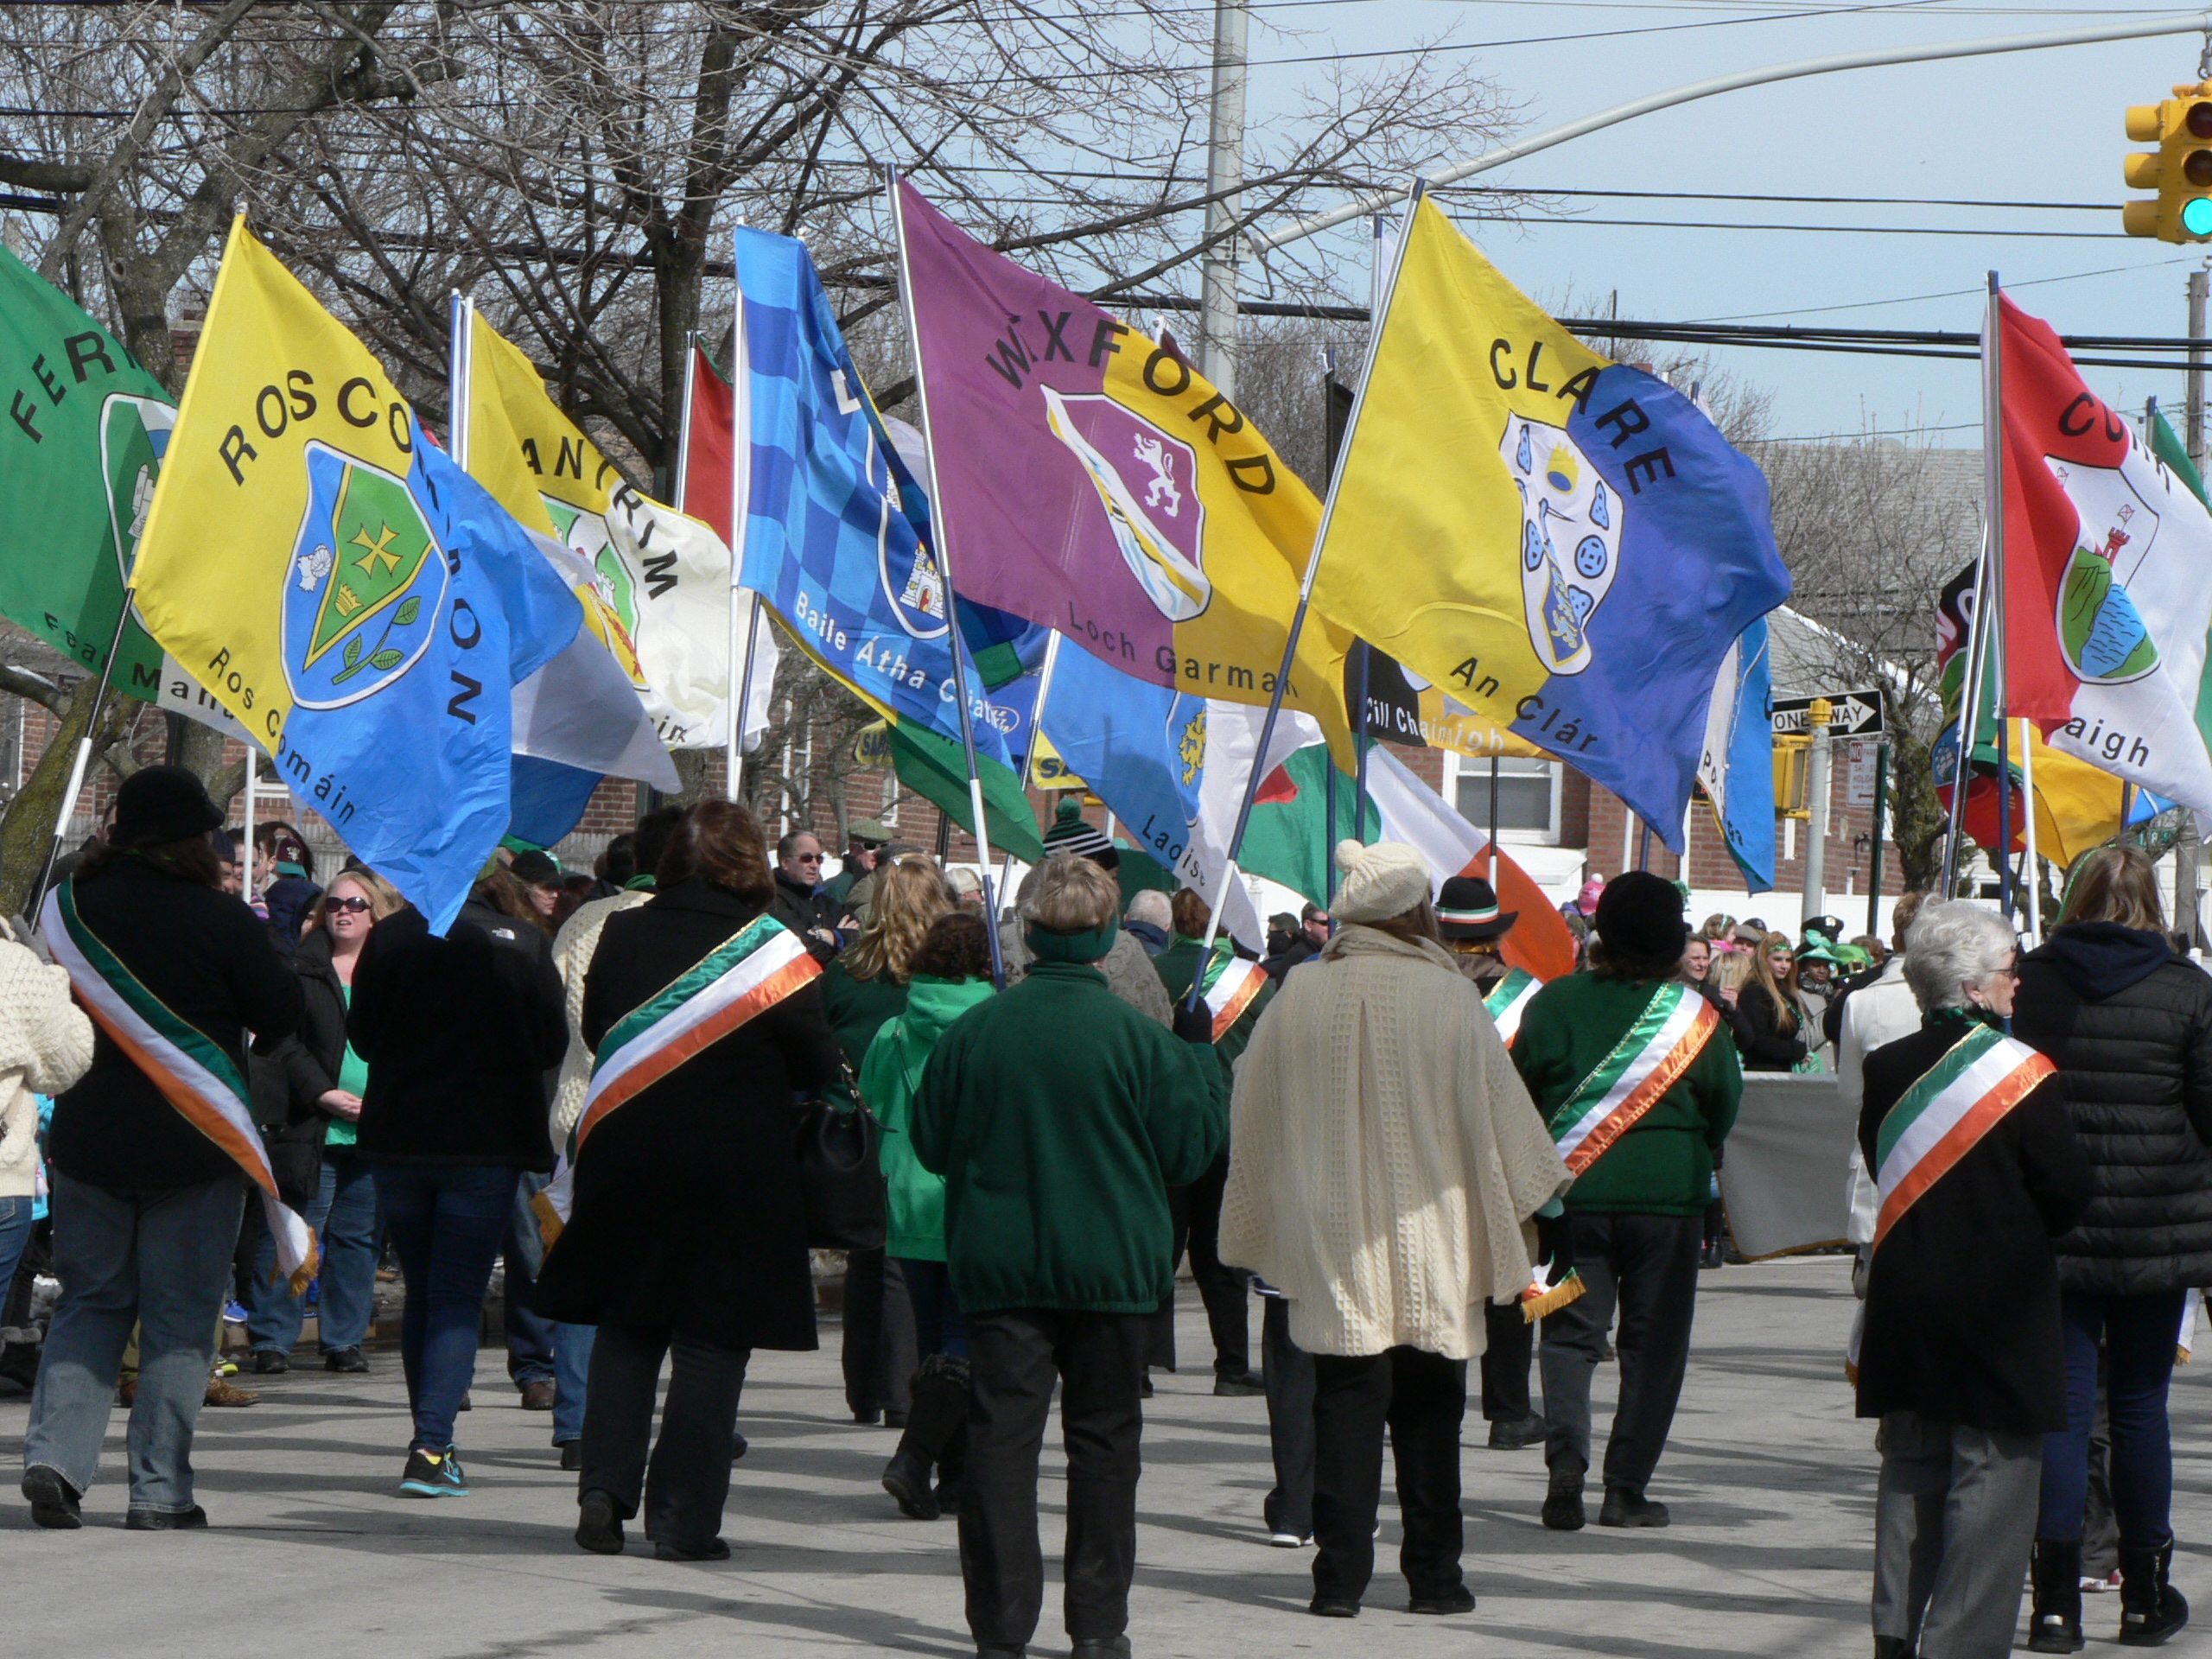 St. Pat’s 2015 County Flags